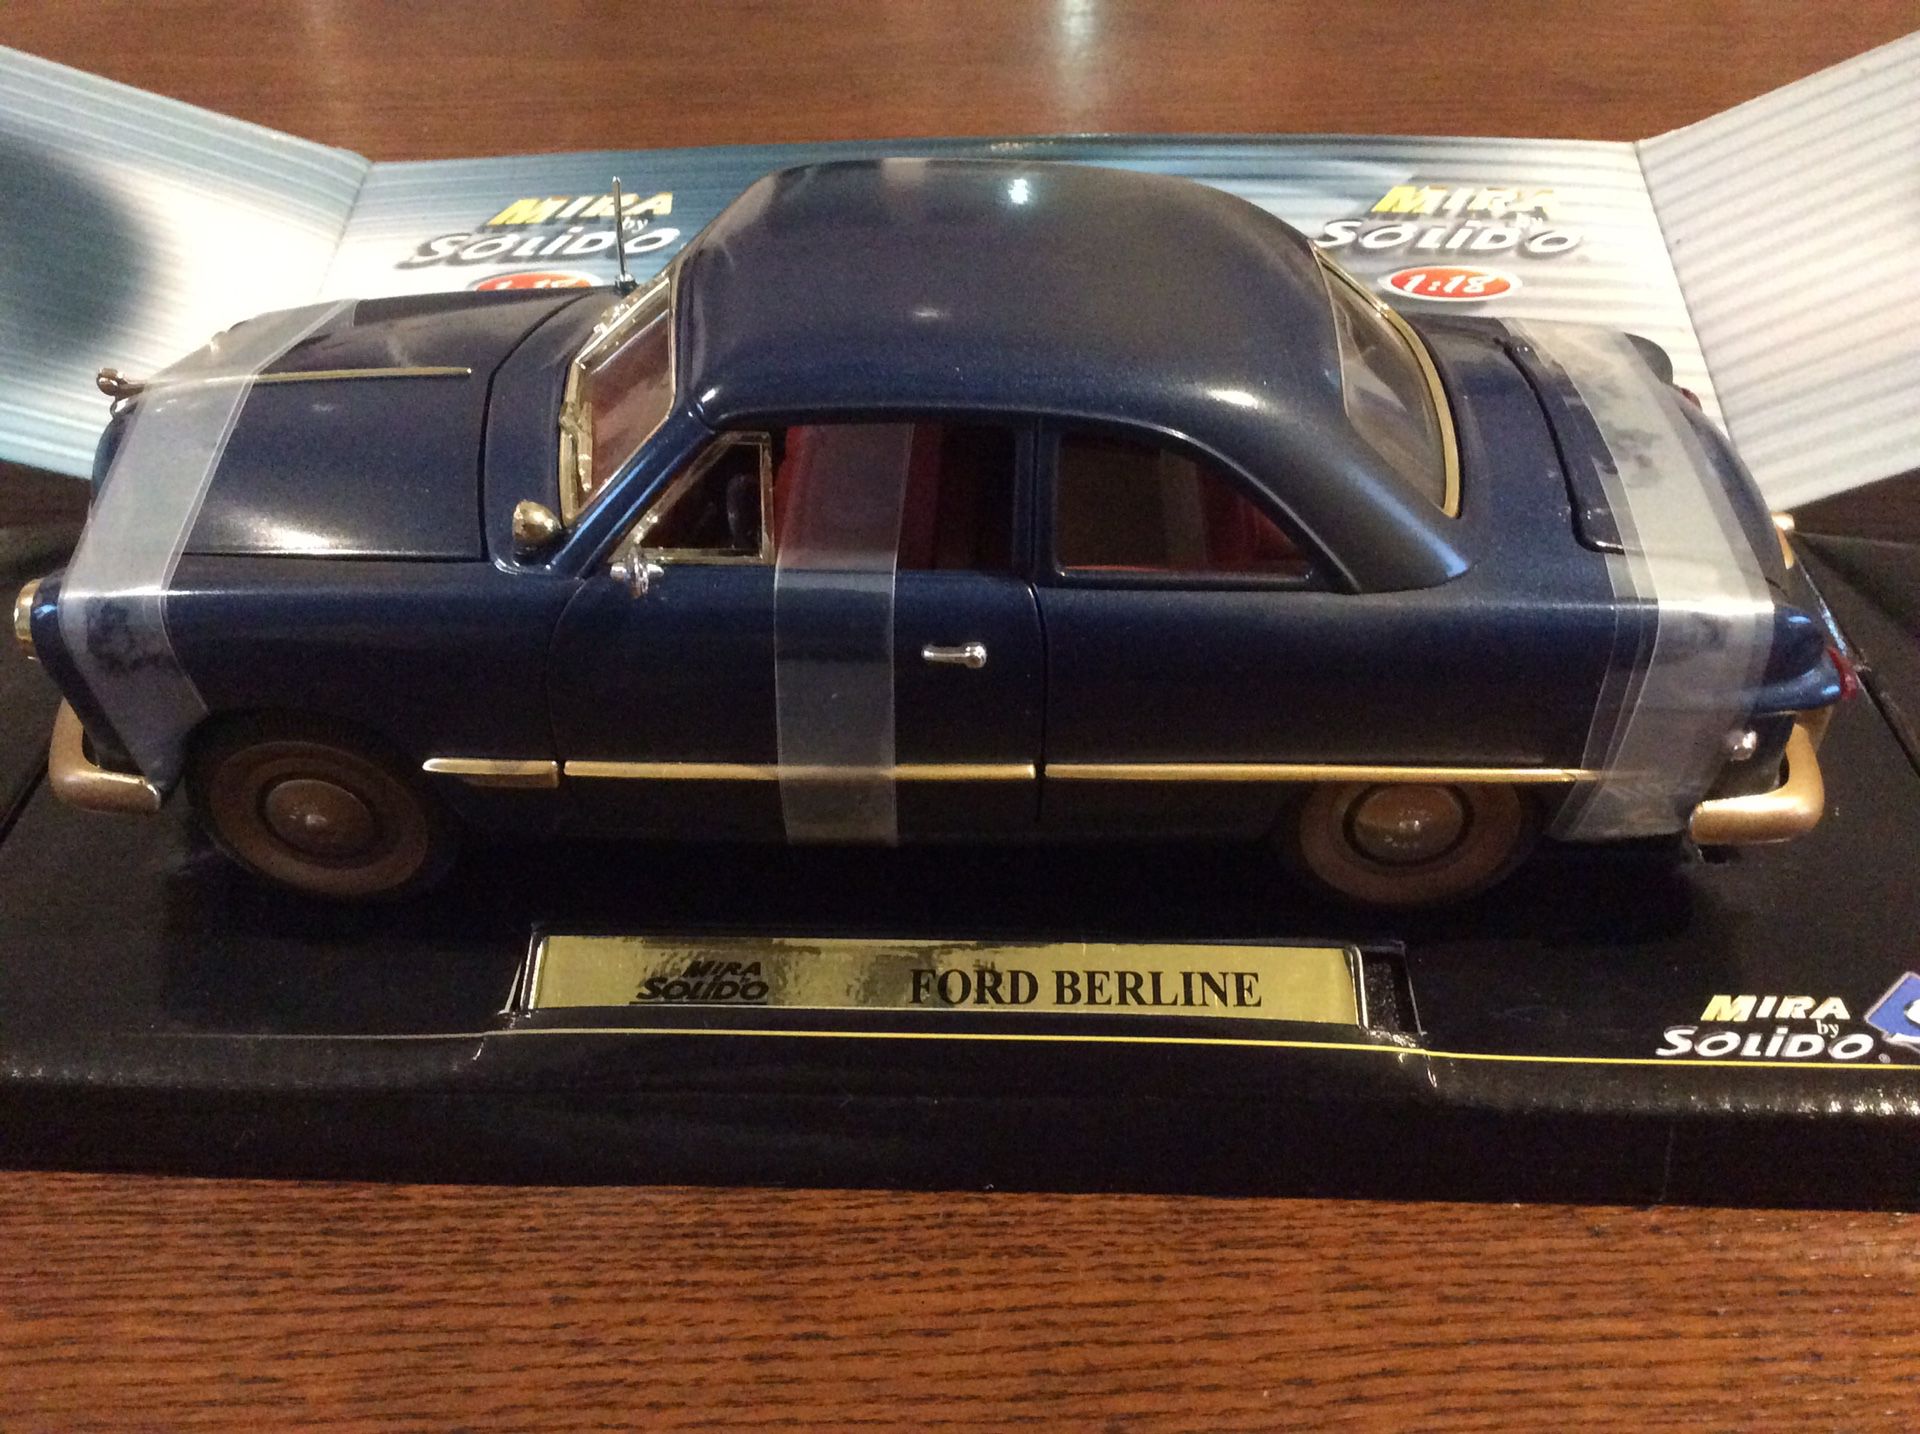 1949 Ford Berlin diecast 1/18 scale